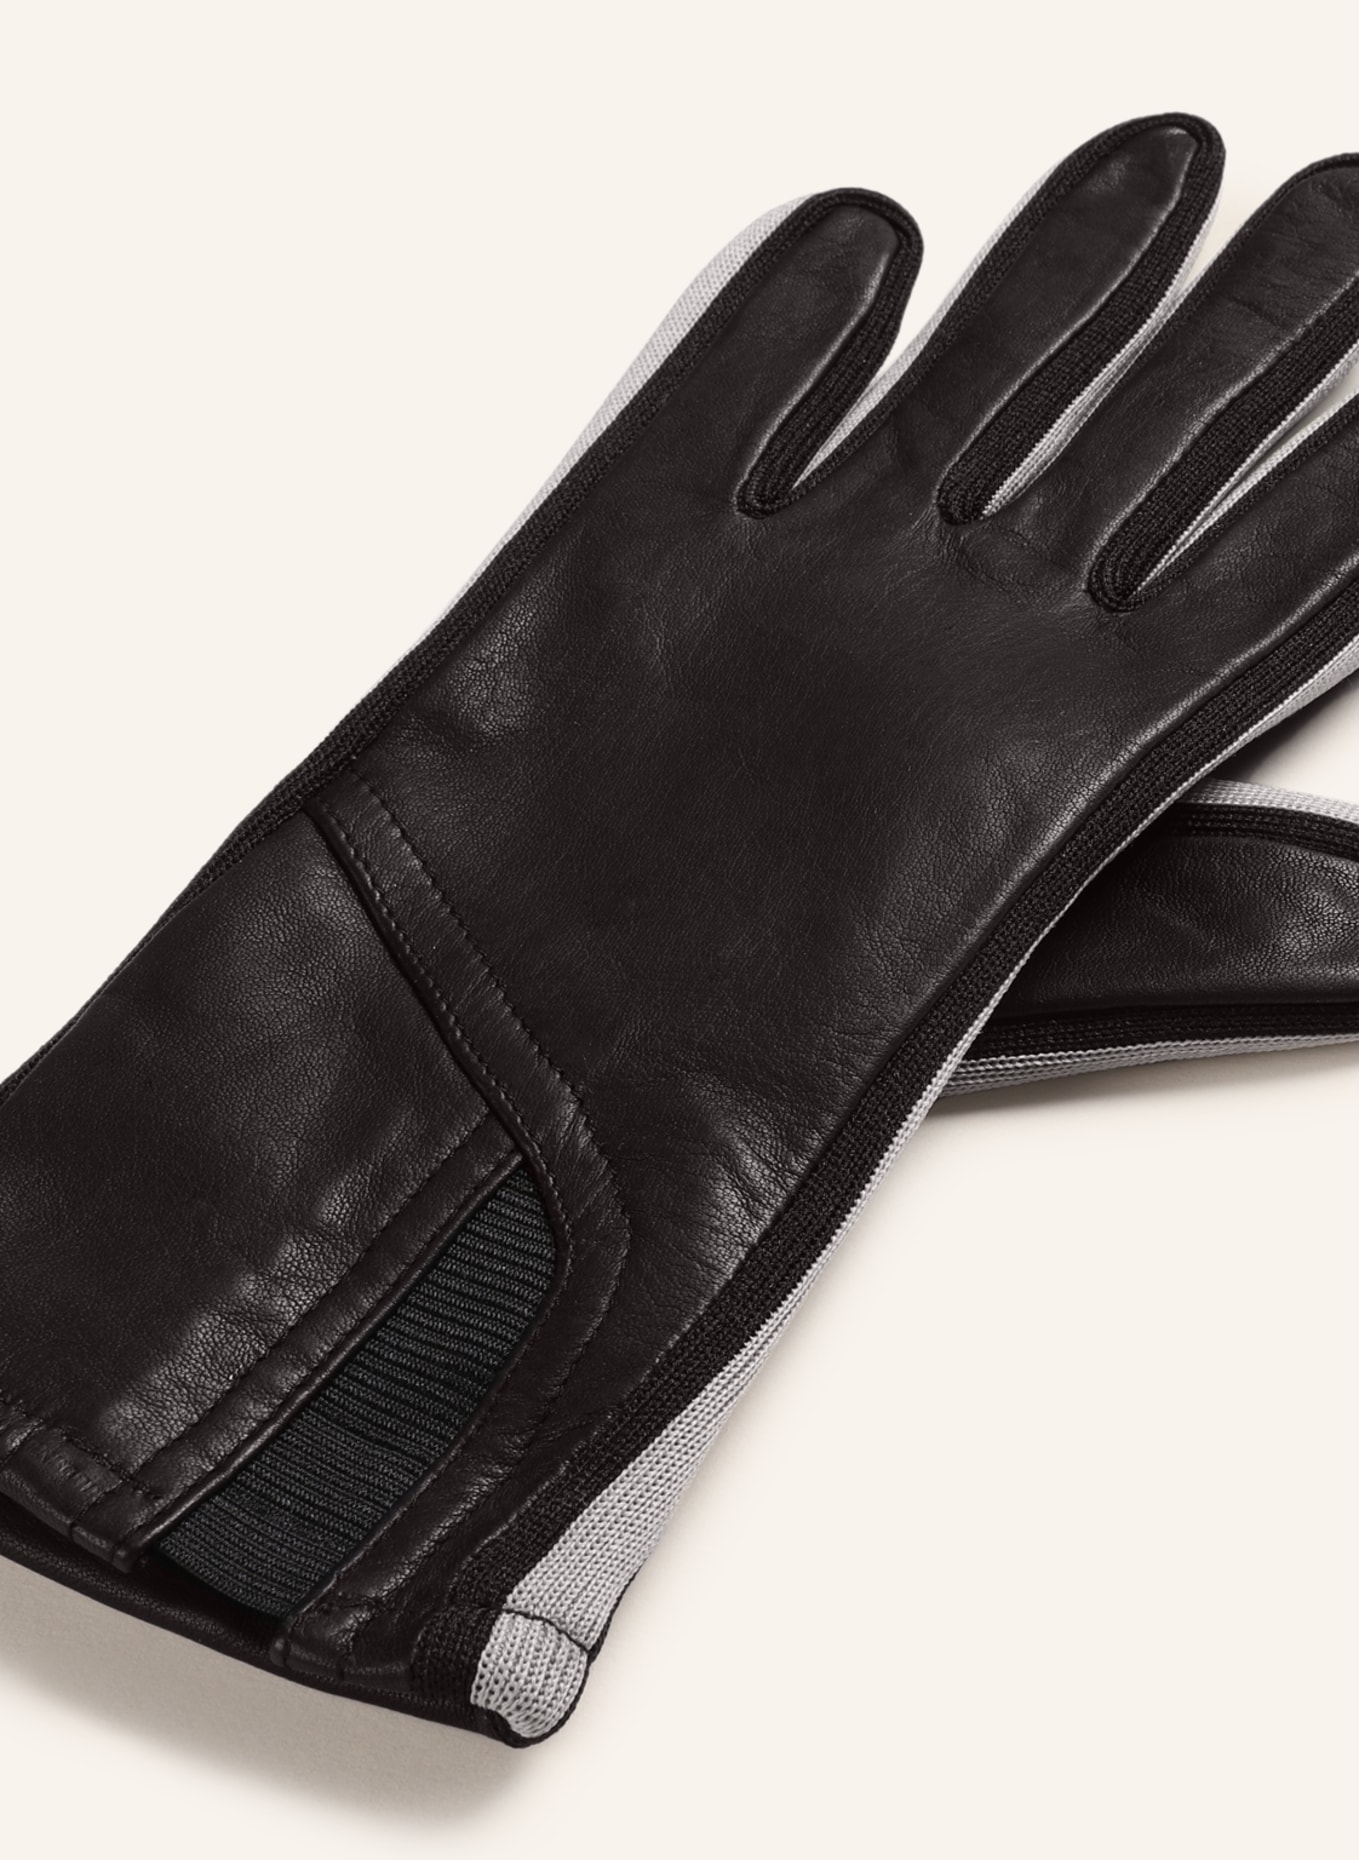 function touchscreen TOUCH gloves in KESSLER with GIL black Leather